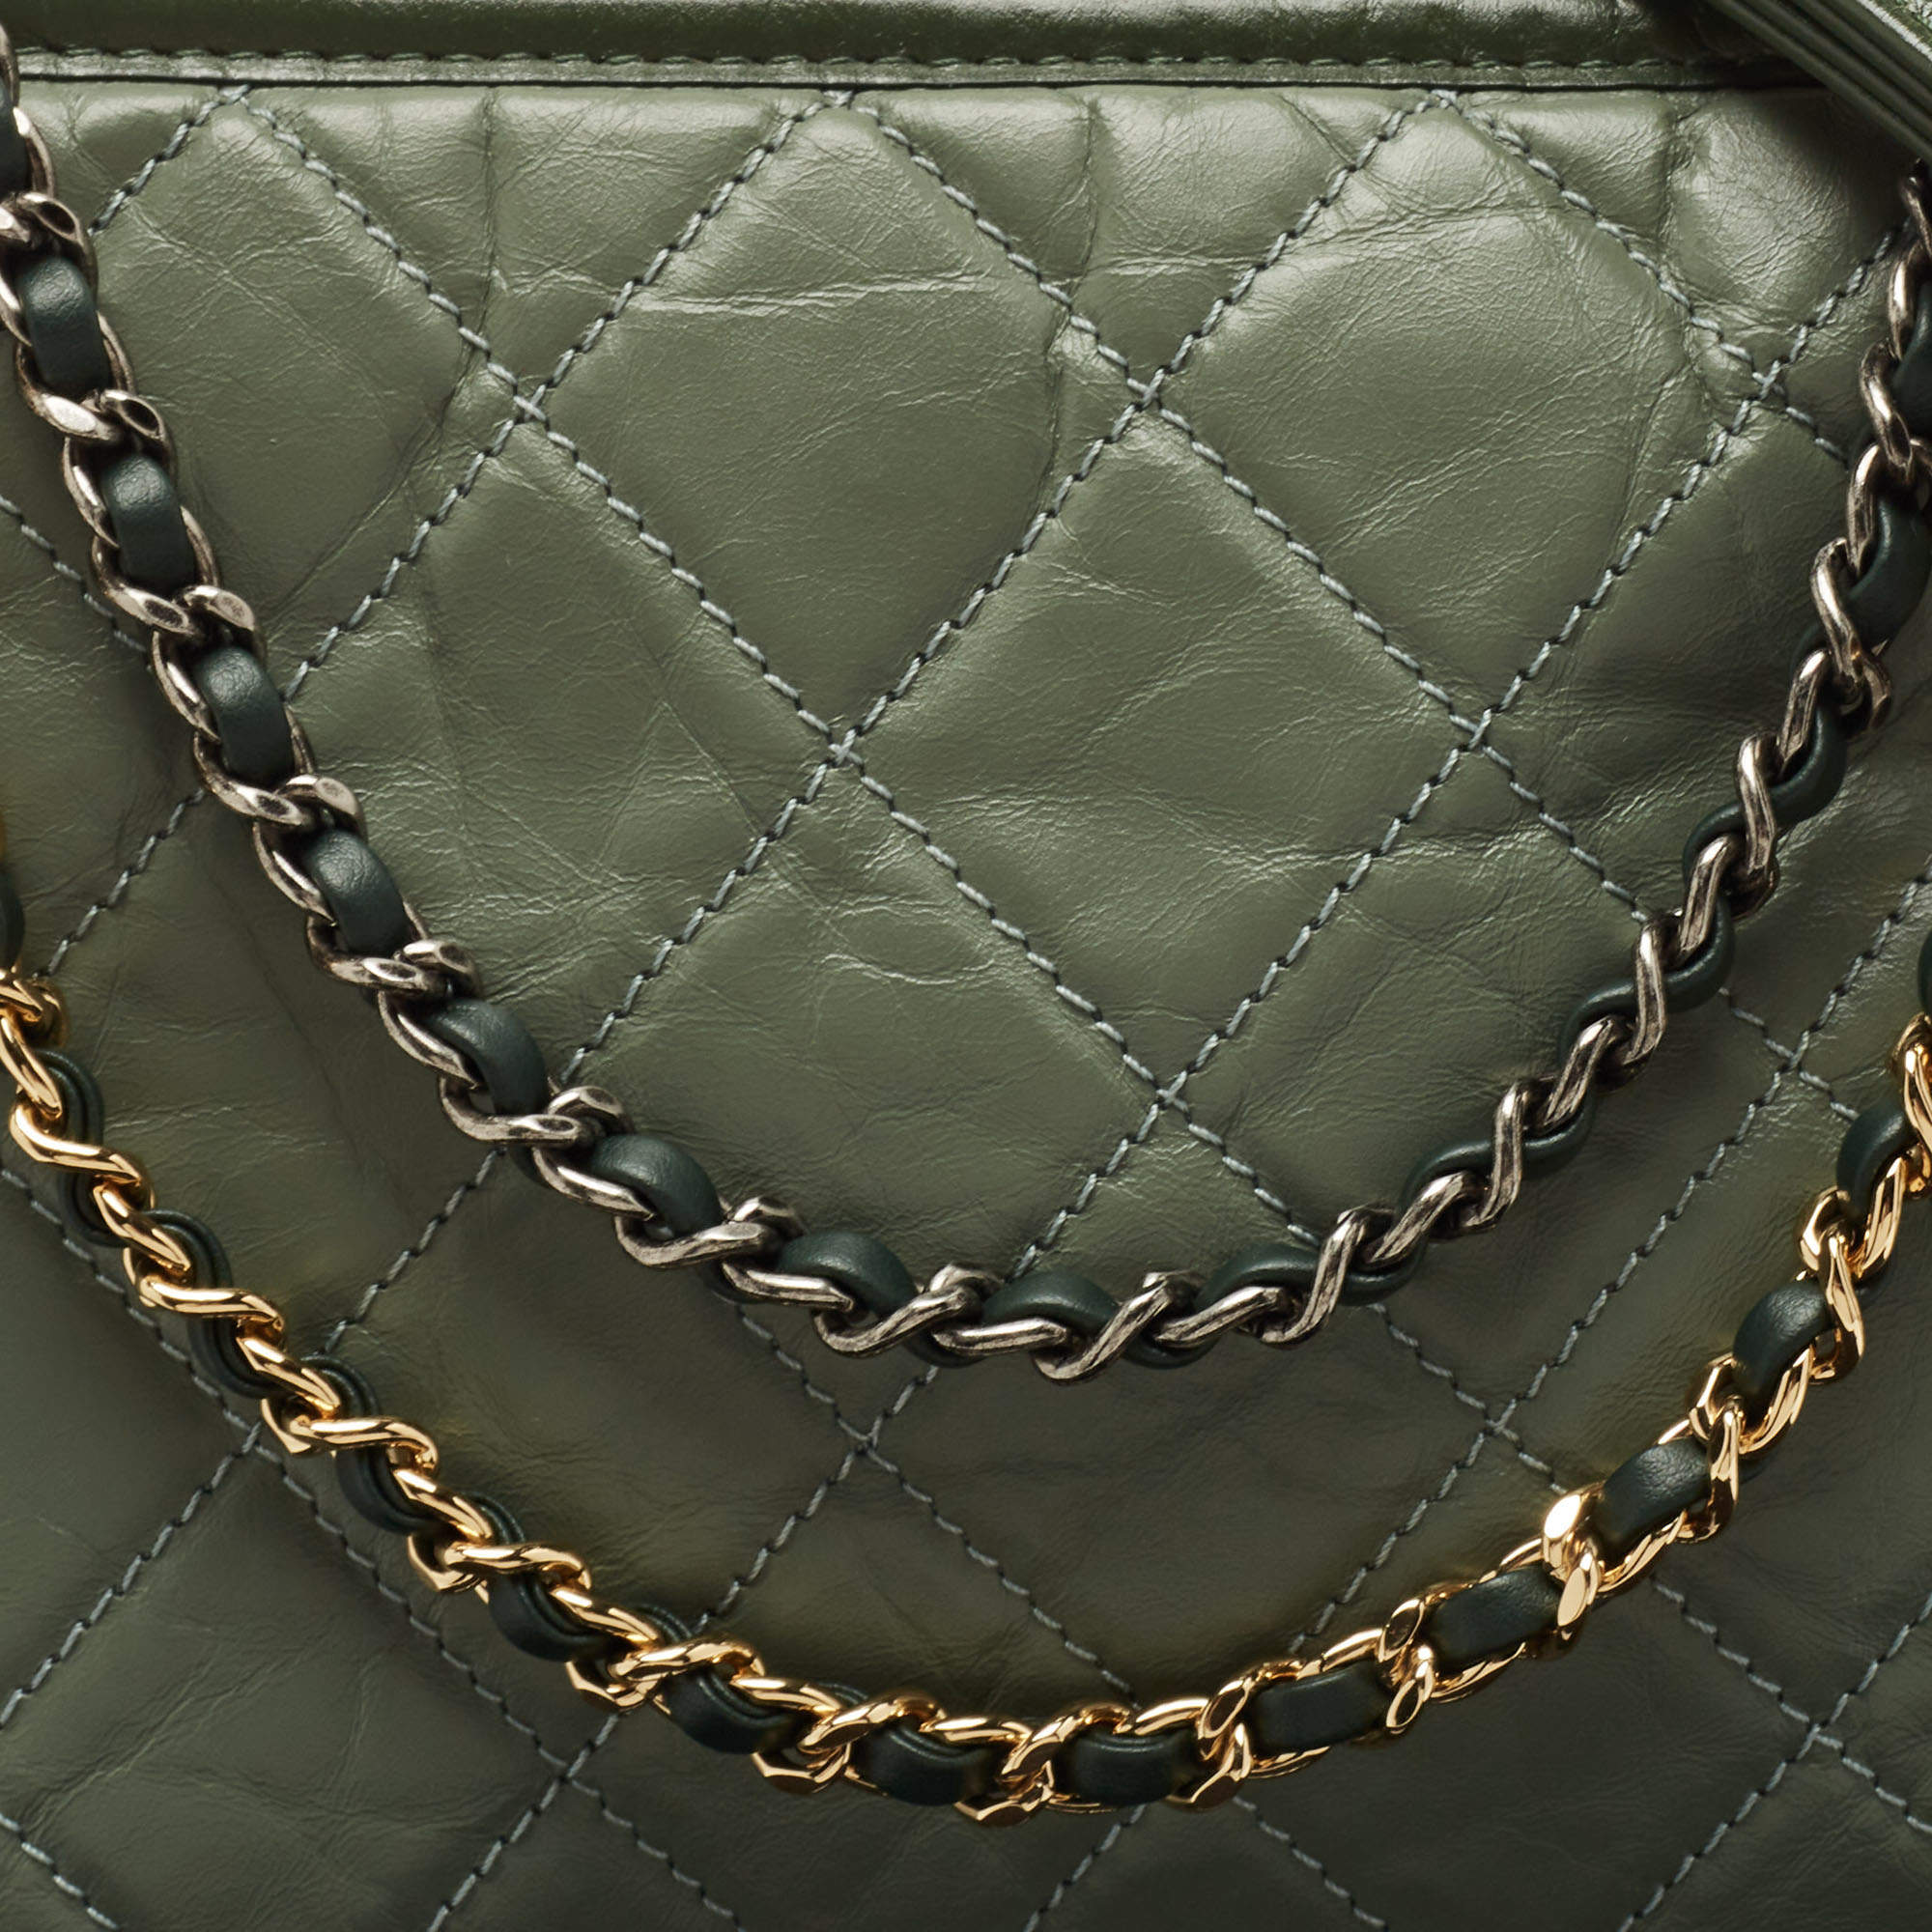 Chanel Quilted Gabrielle Hobo Tweed Bag - Lux - Greenwald Antiques